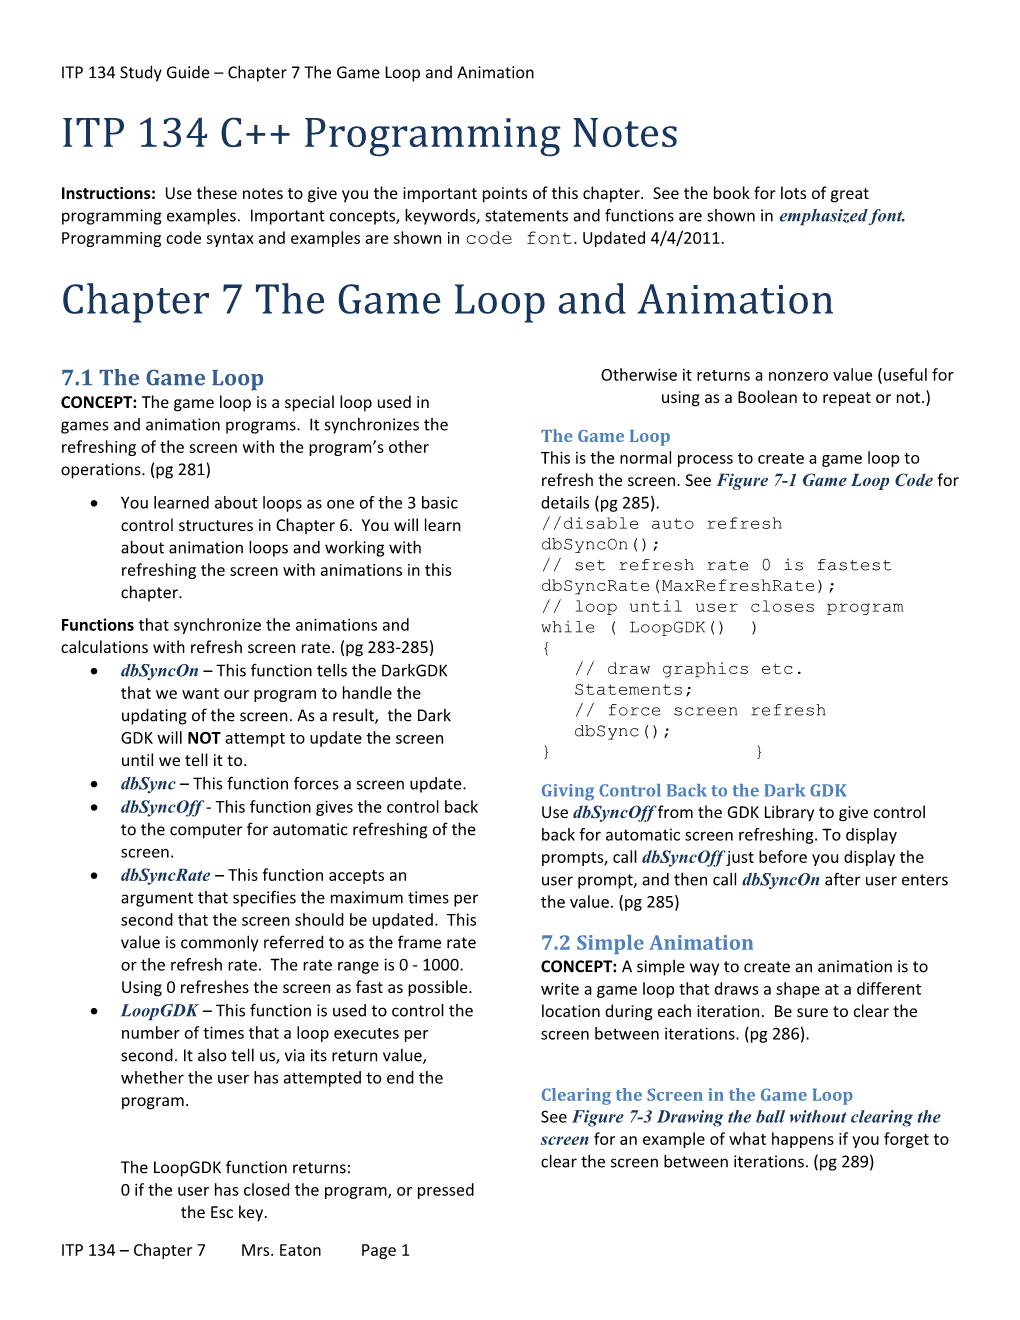 ITP 134 Study Guide Chapter 7 the Game Loop and Animation